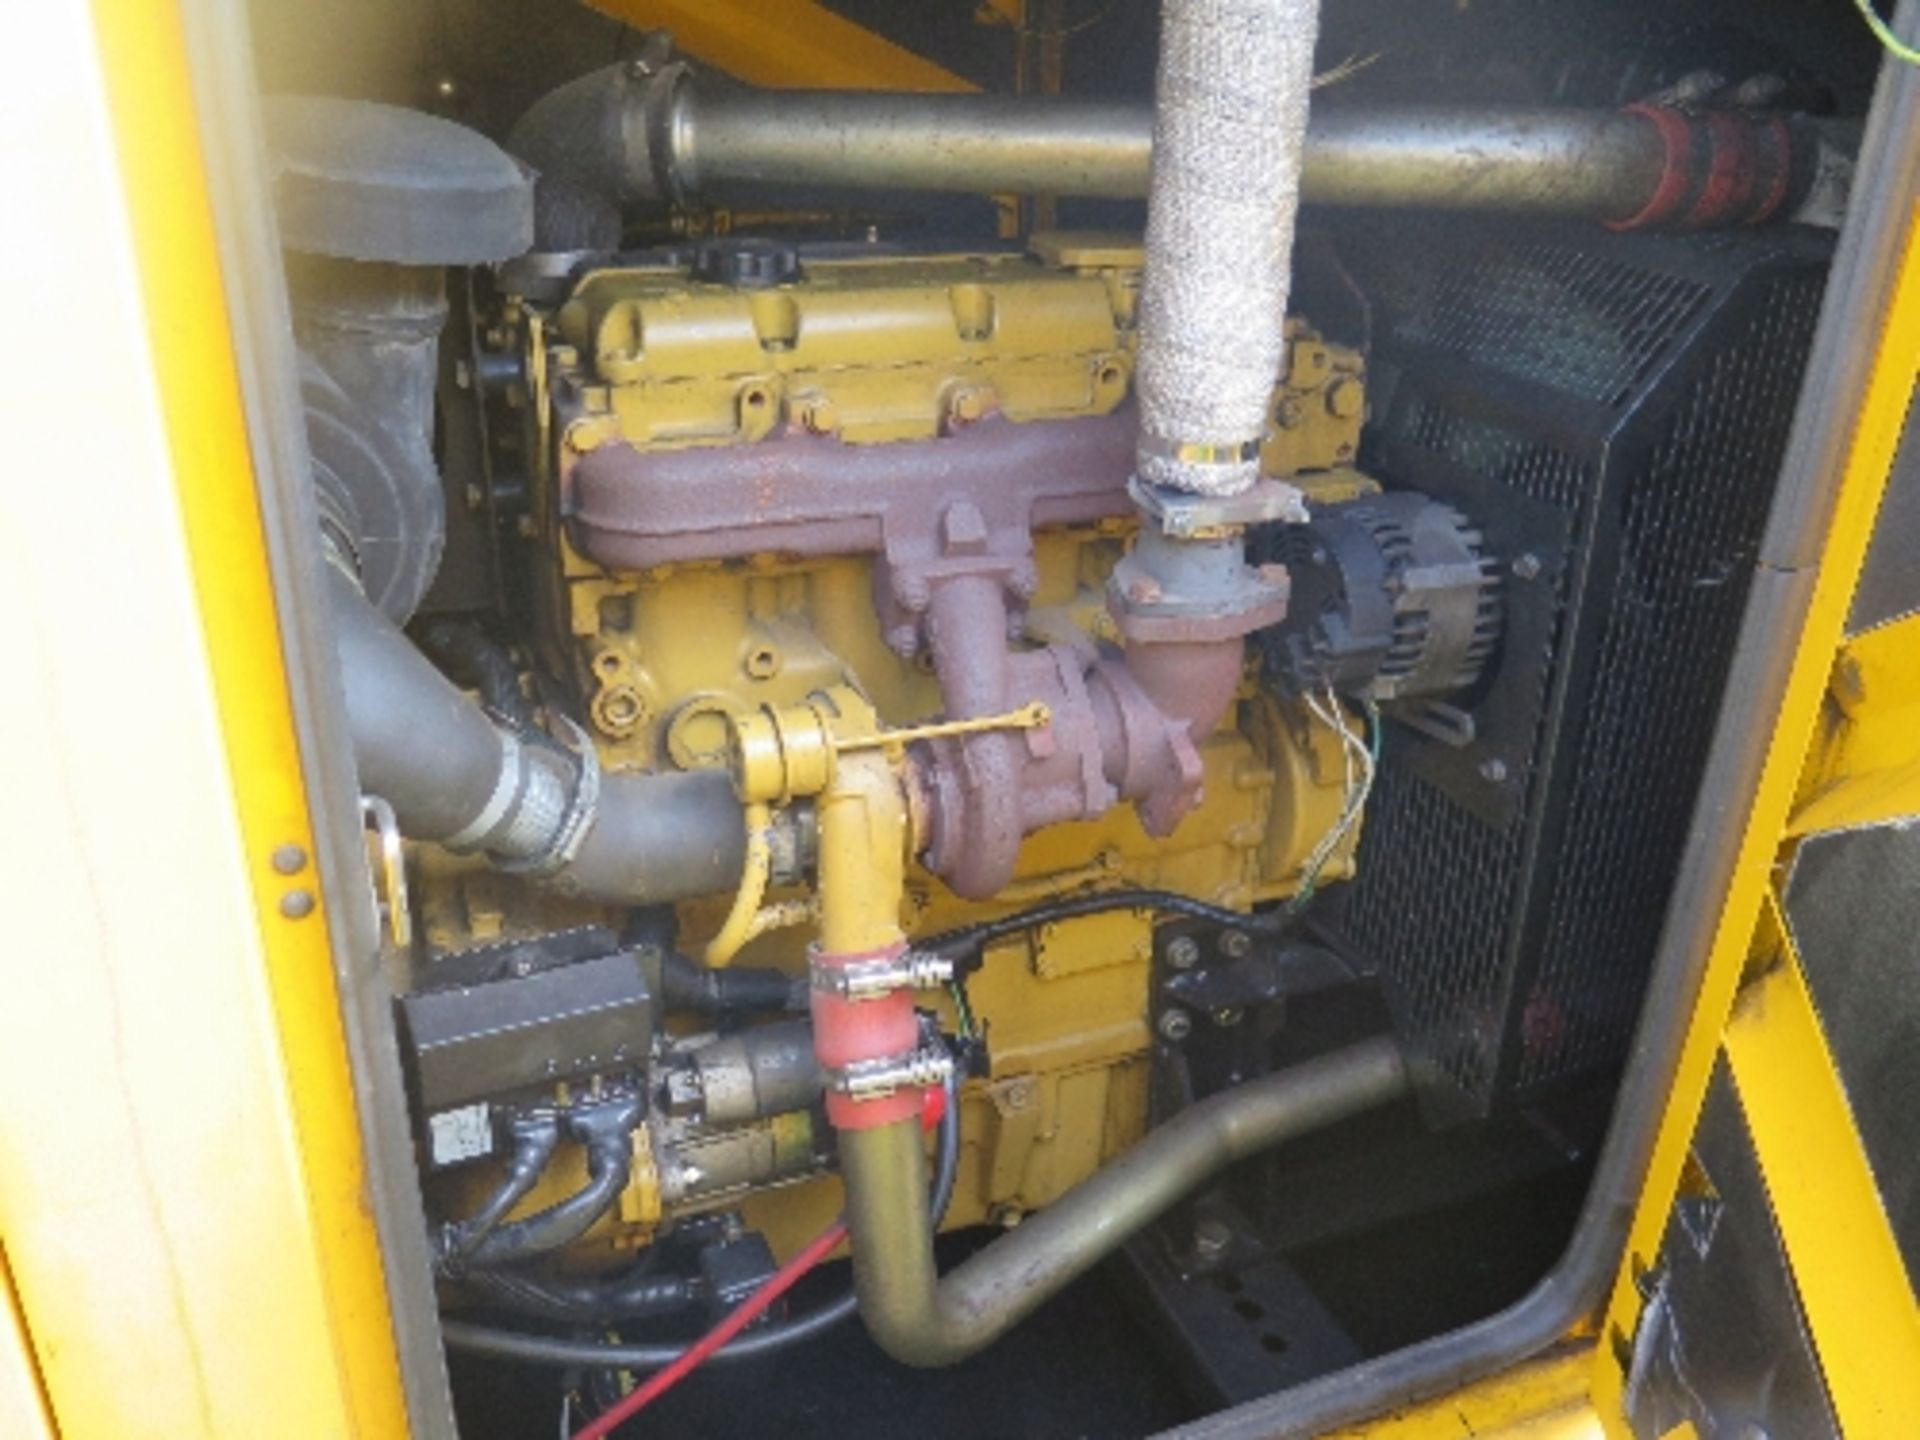 Caterpillar XQE80 generator 12997 hrs 5003857
PERKINS POWER - RUNS AND MAKES POWER
ALL LOTS are - Image 5 of 5